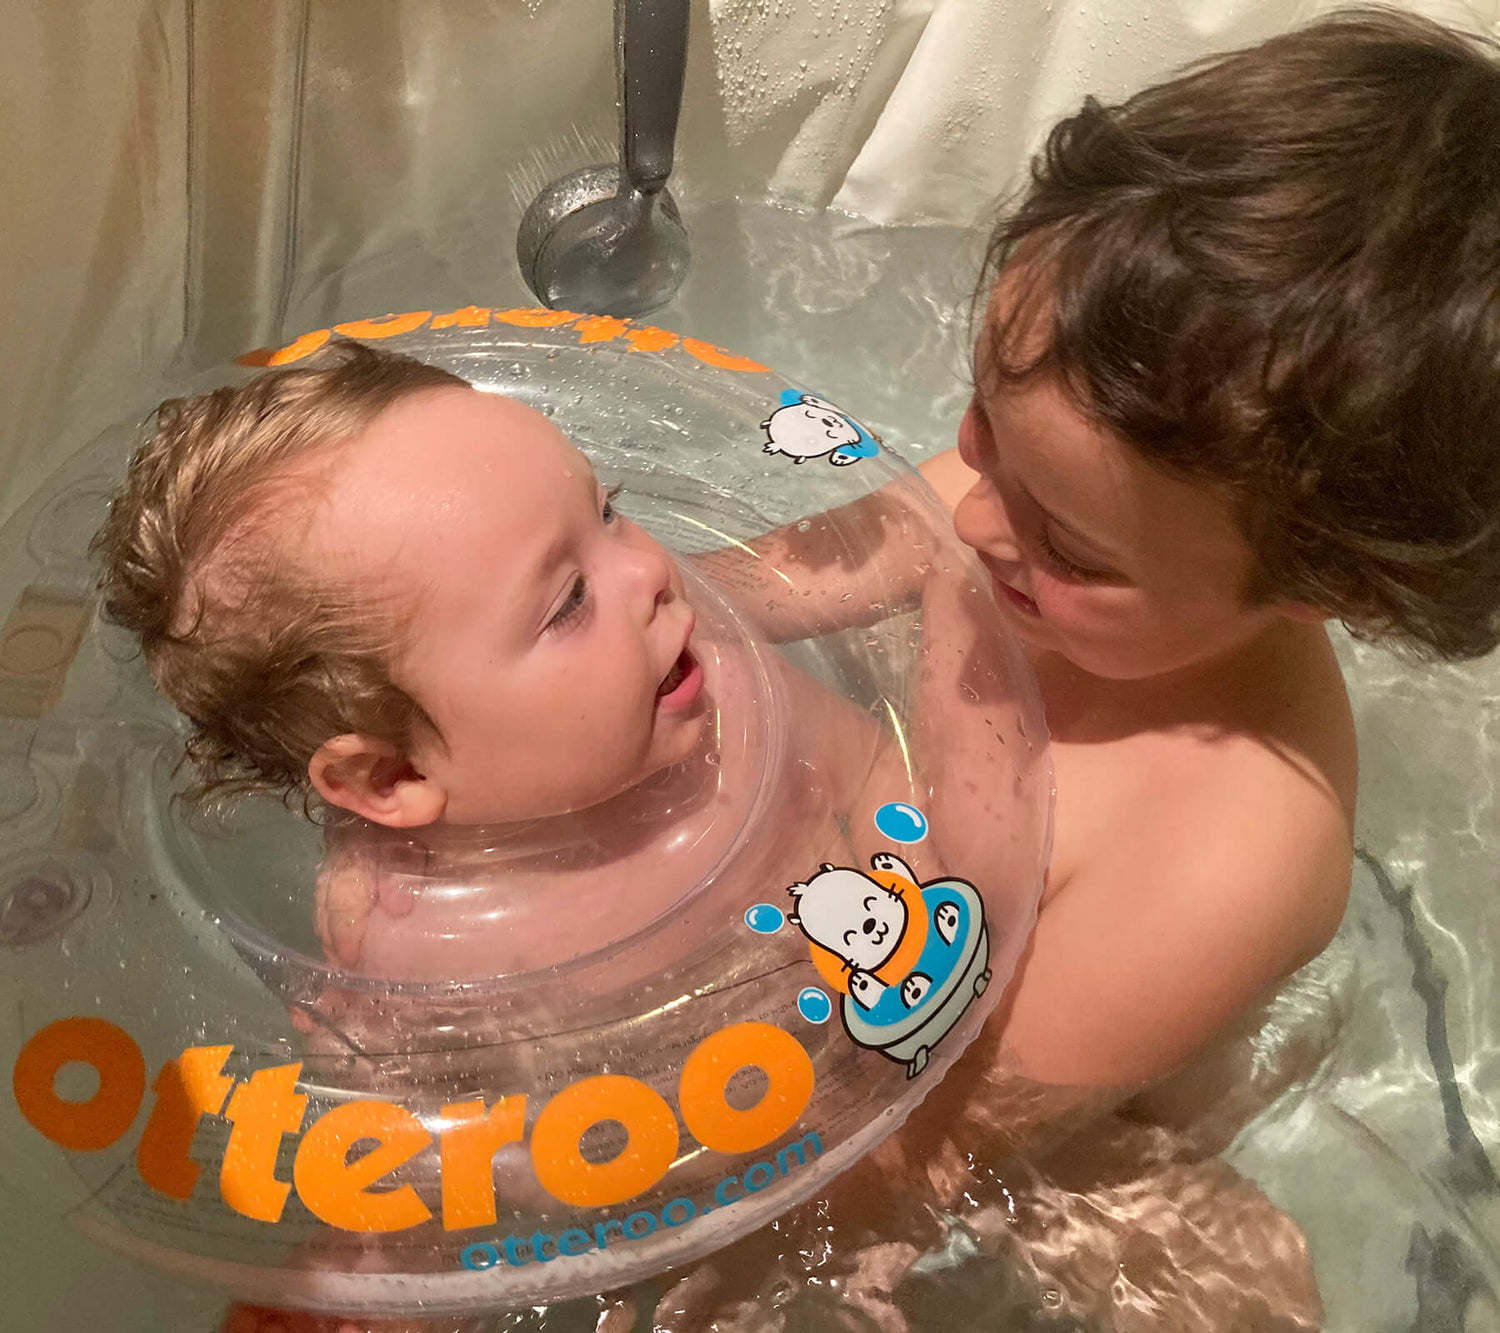 Otteroo is "Magical" for Toddler with Rare Genetic Disease